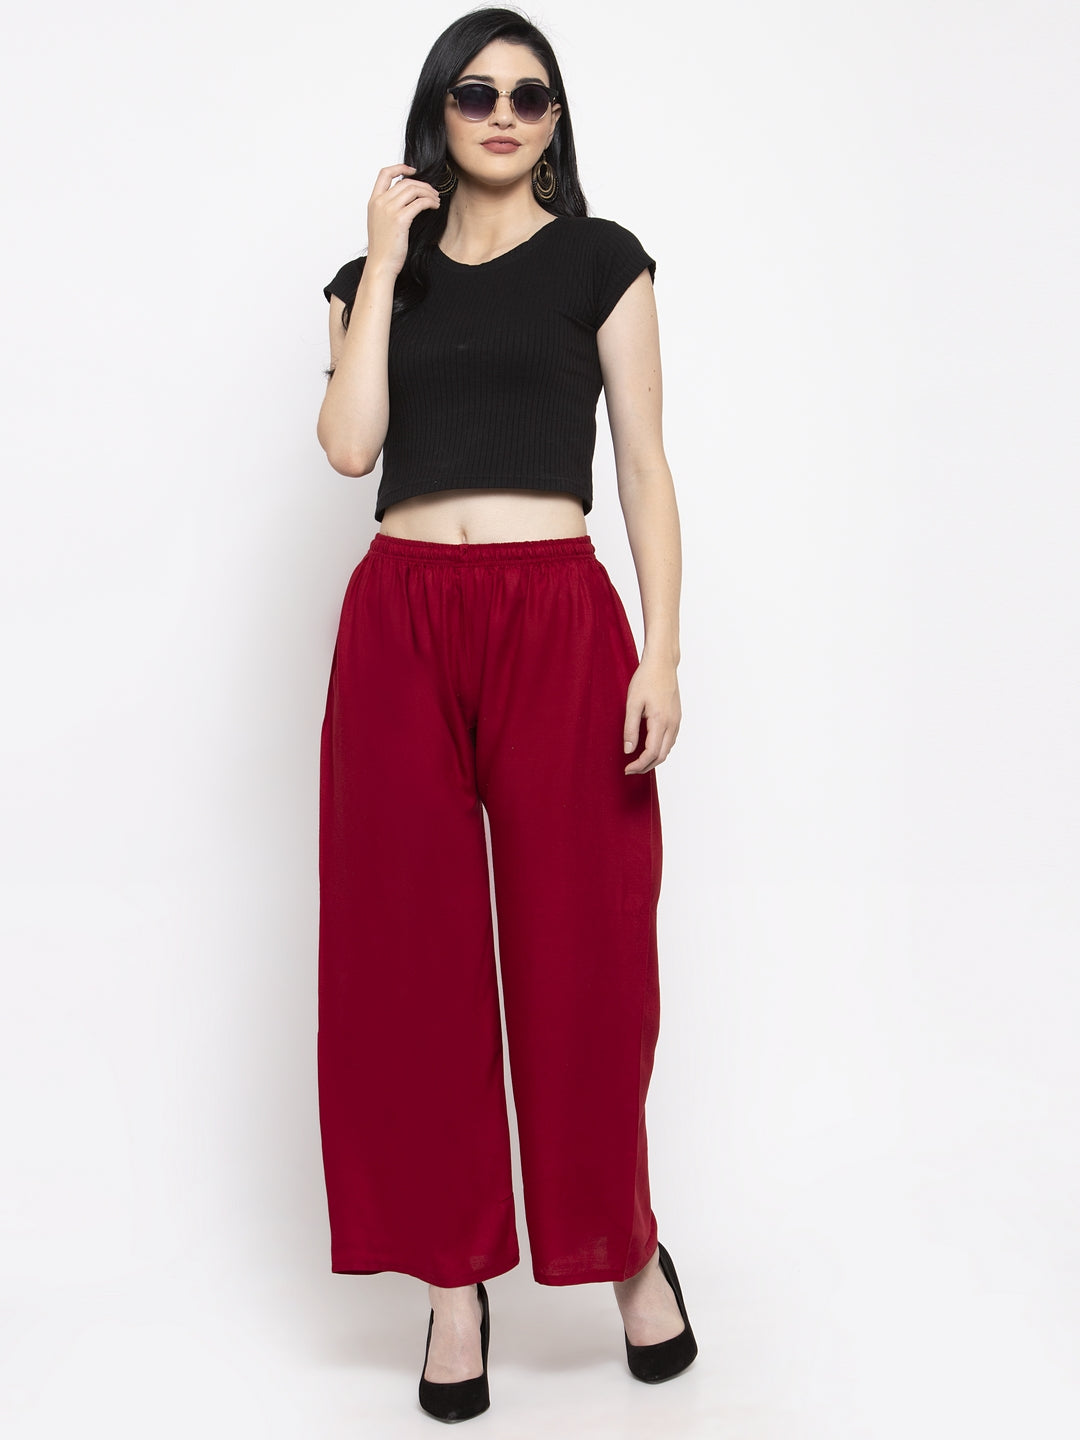 Women's Solid Off-White & Maroon Rayon Palazzo (Pack Of 2) - Wahe-NOOR